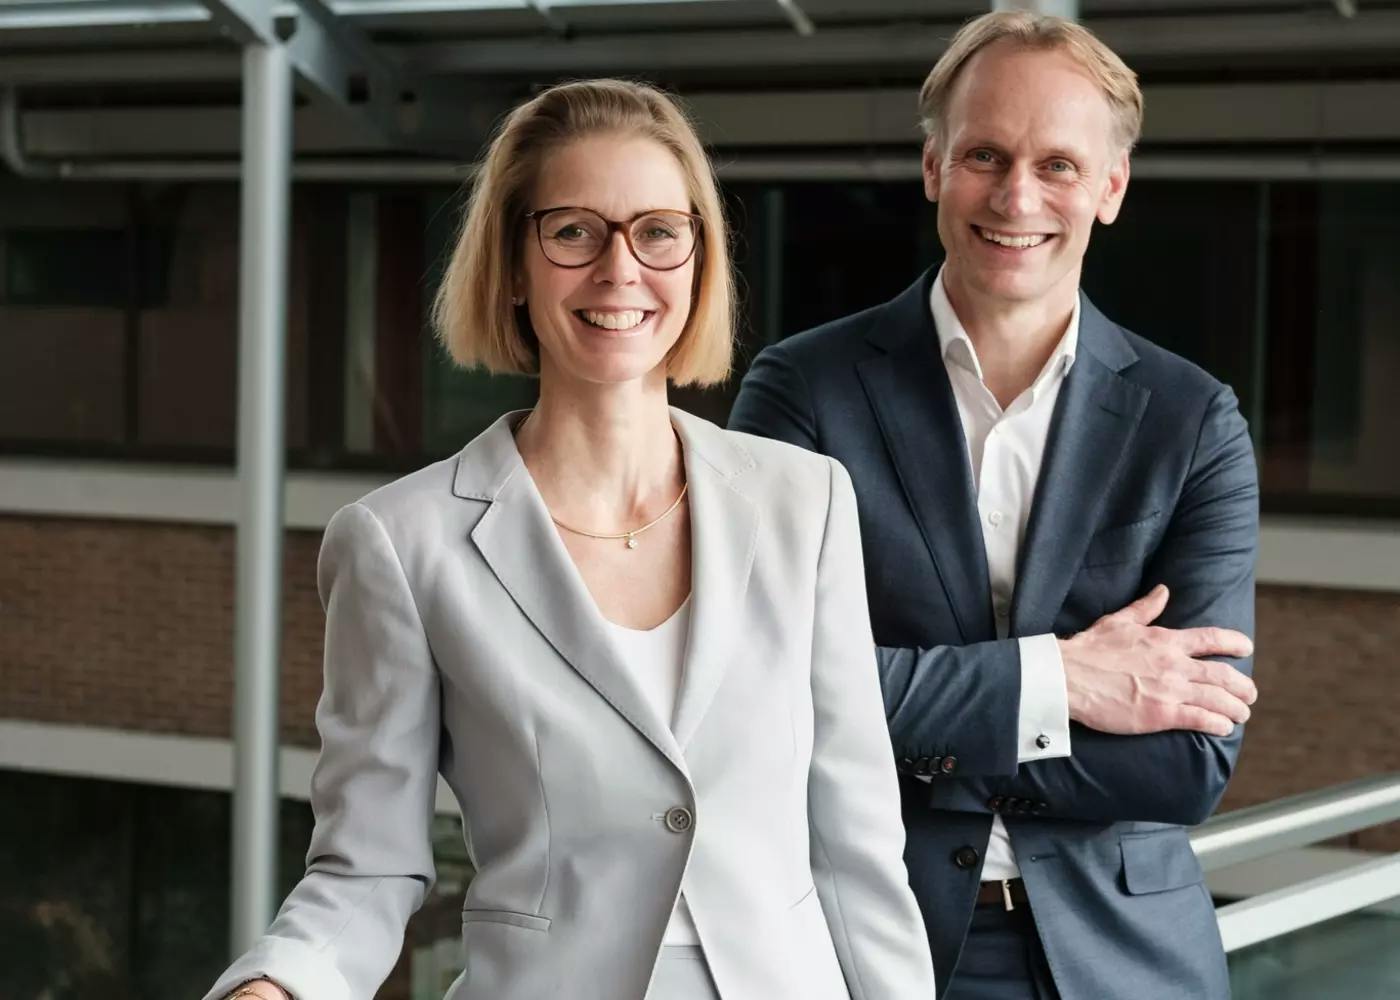 Mark Heine (Chief Executive Officer) and Barbara Geelen (Chief Financial Officer) comprise Fugro's board of management